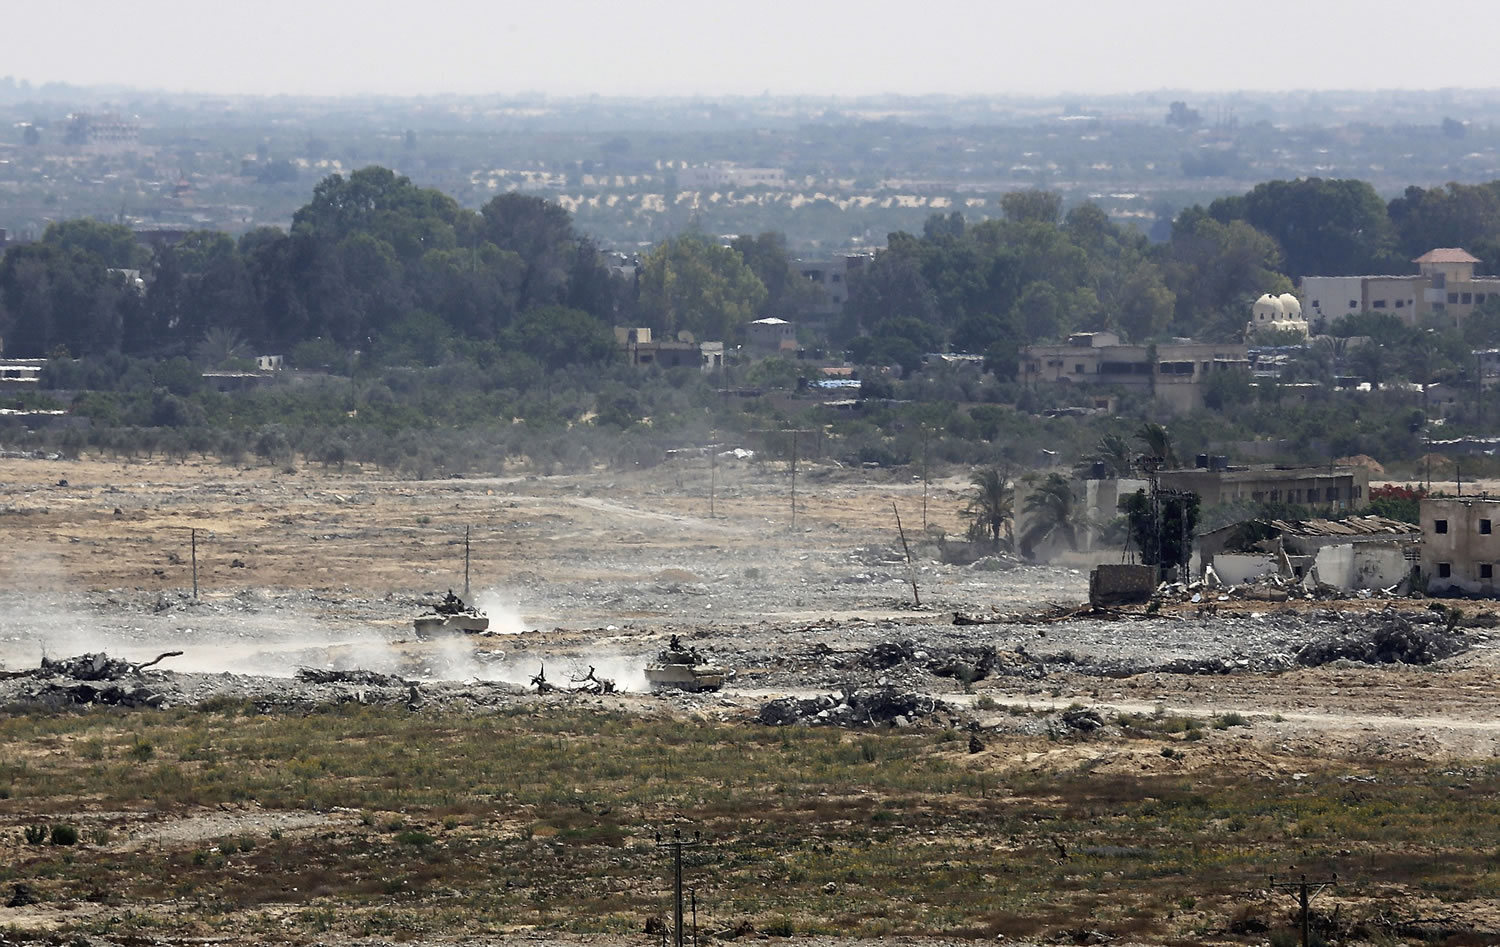 Egyptian armored vehicles patrol Thursday on the Egyptian side of the border, seen from the Gaza Strip.